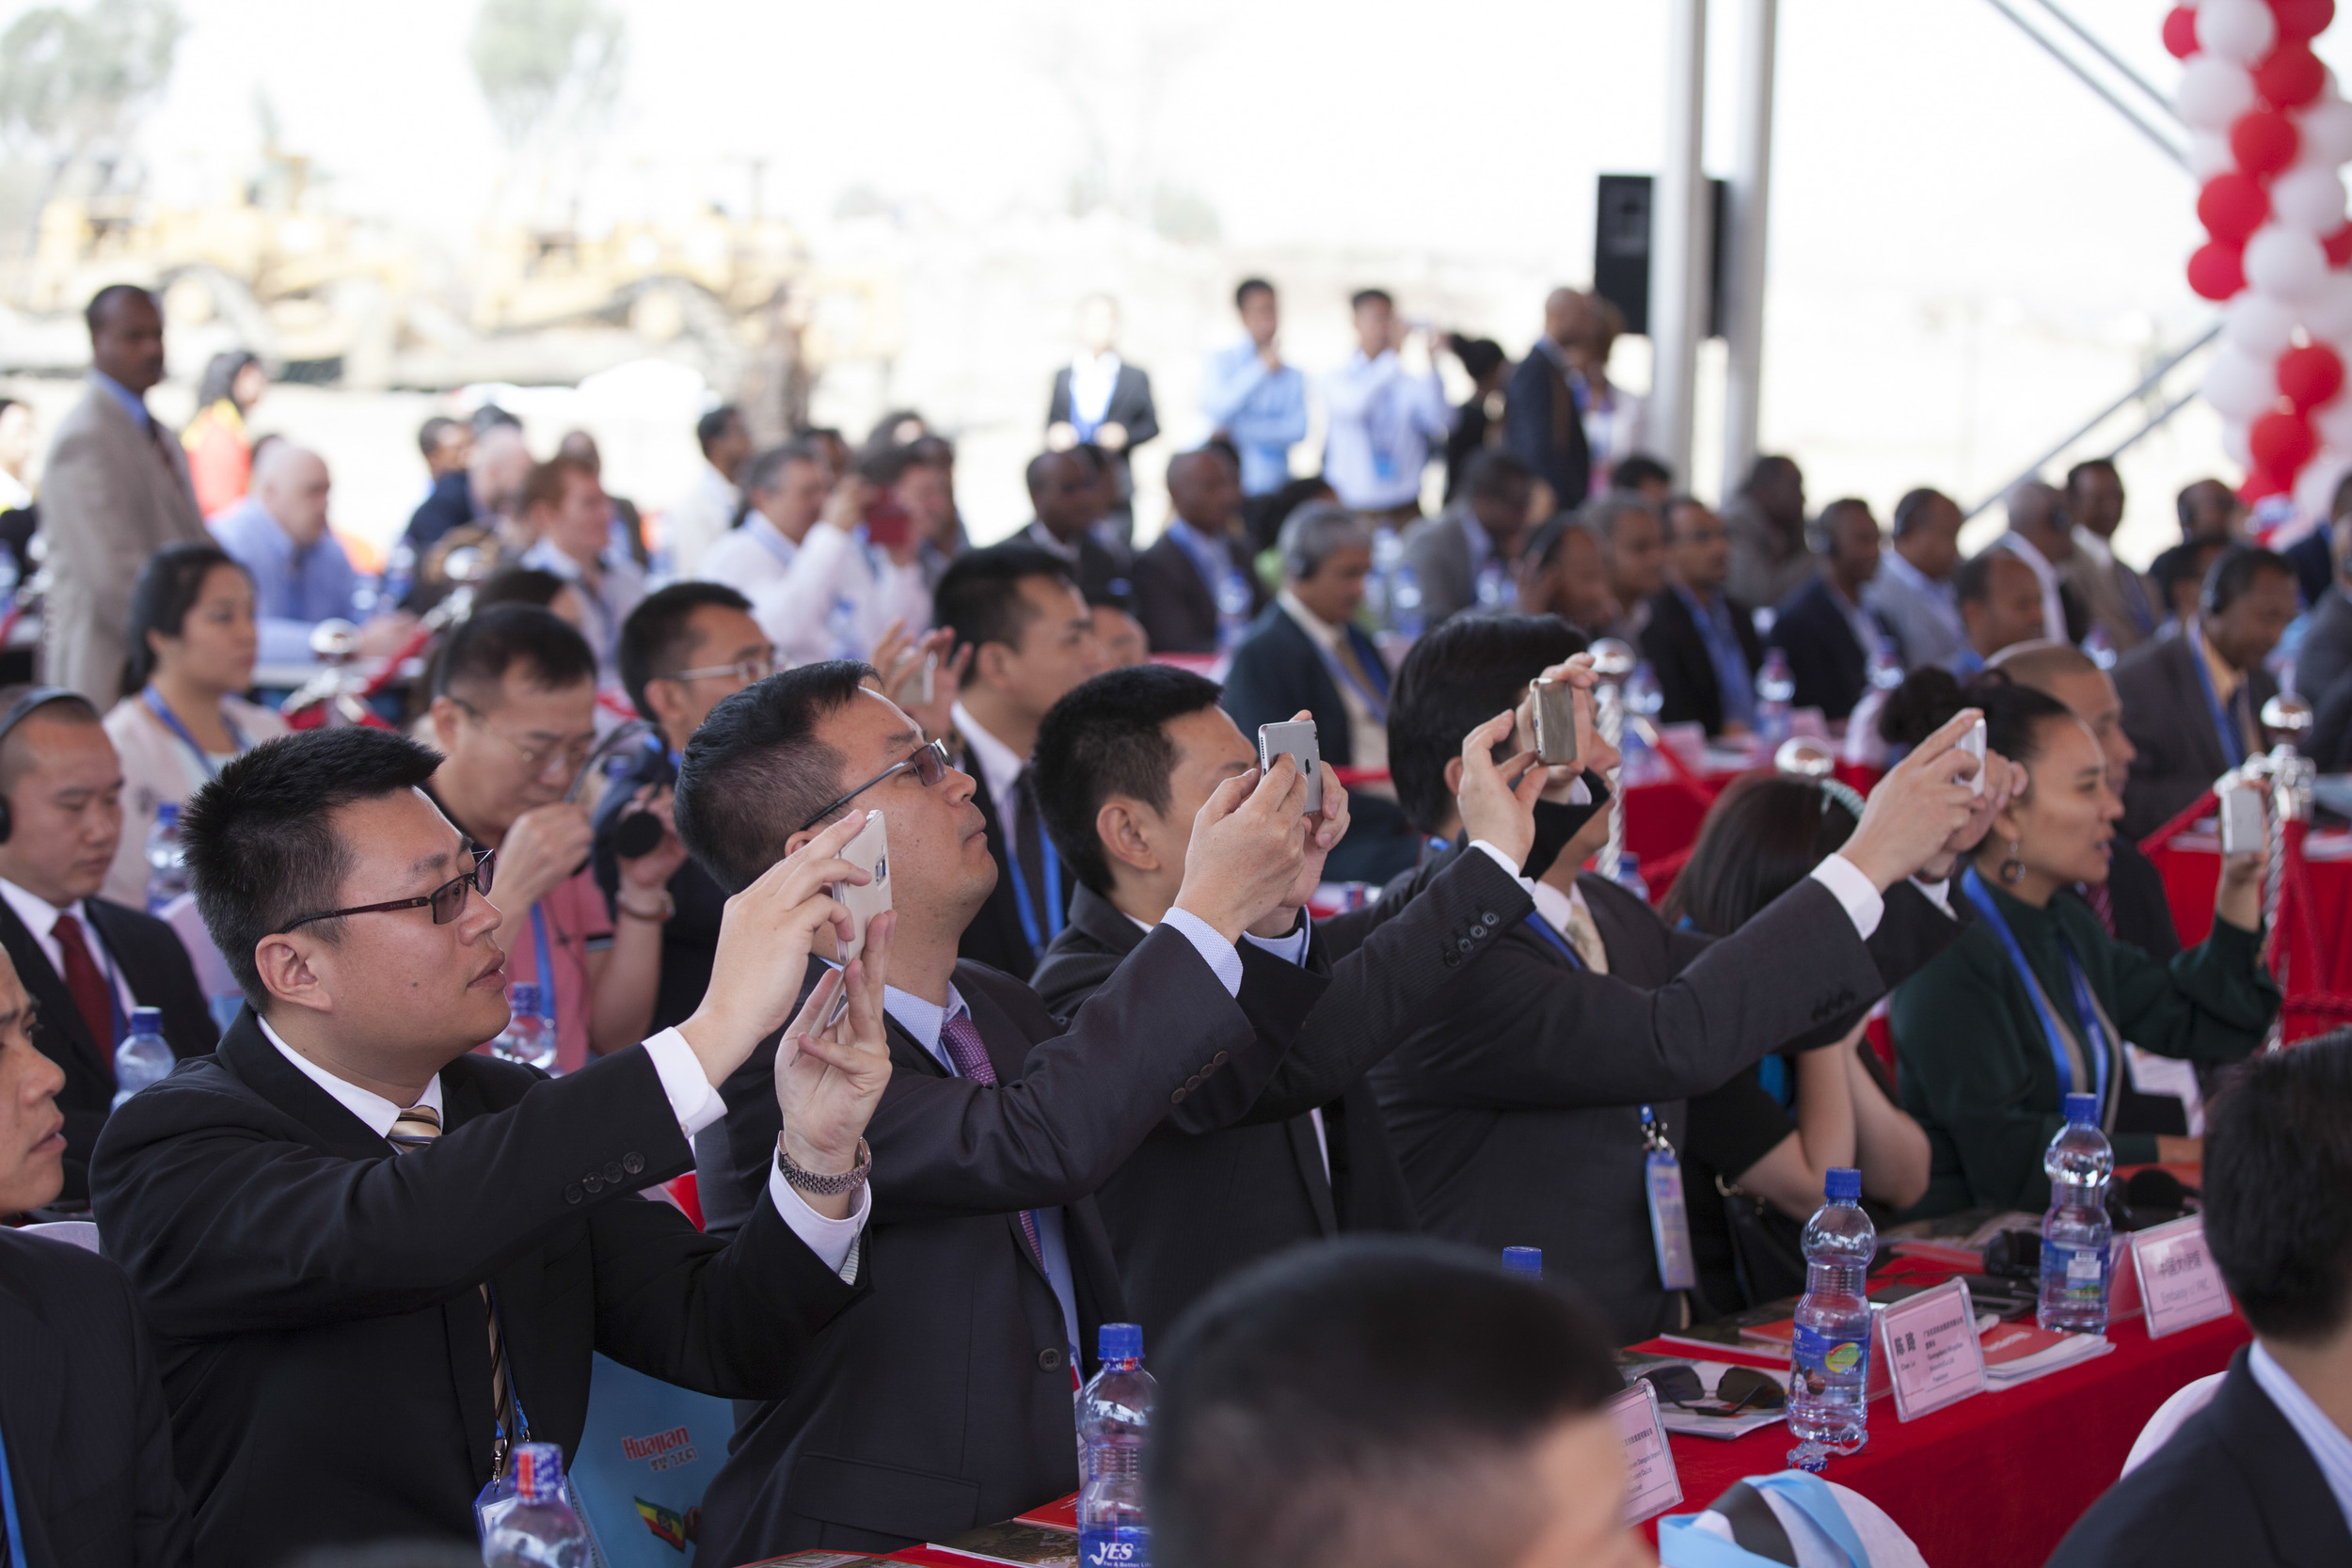  Chinese businessmen are pictured taking photos with their phones during the opening ceremony for the groundbreaking of the Ethiopia-China Dong Guan Huajian International Light Industrial Zone outside of Addis Ababa on 16 April 2015. AFP Photo / Zach